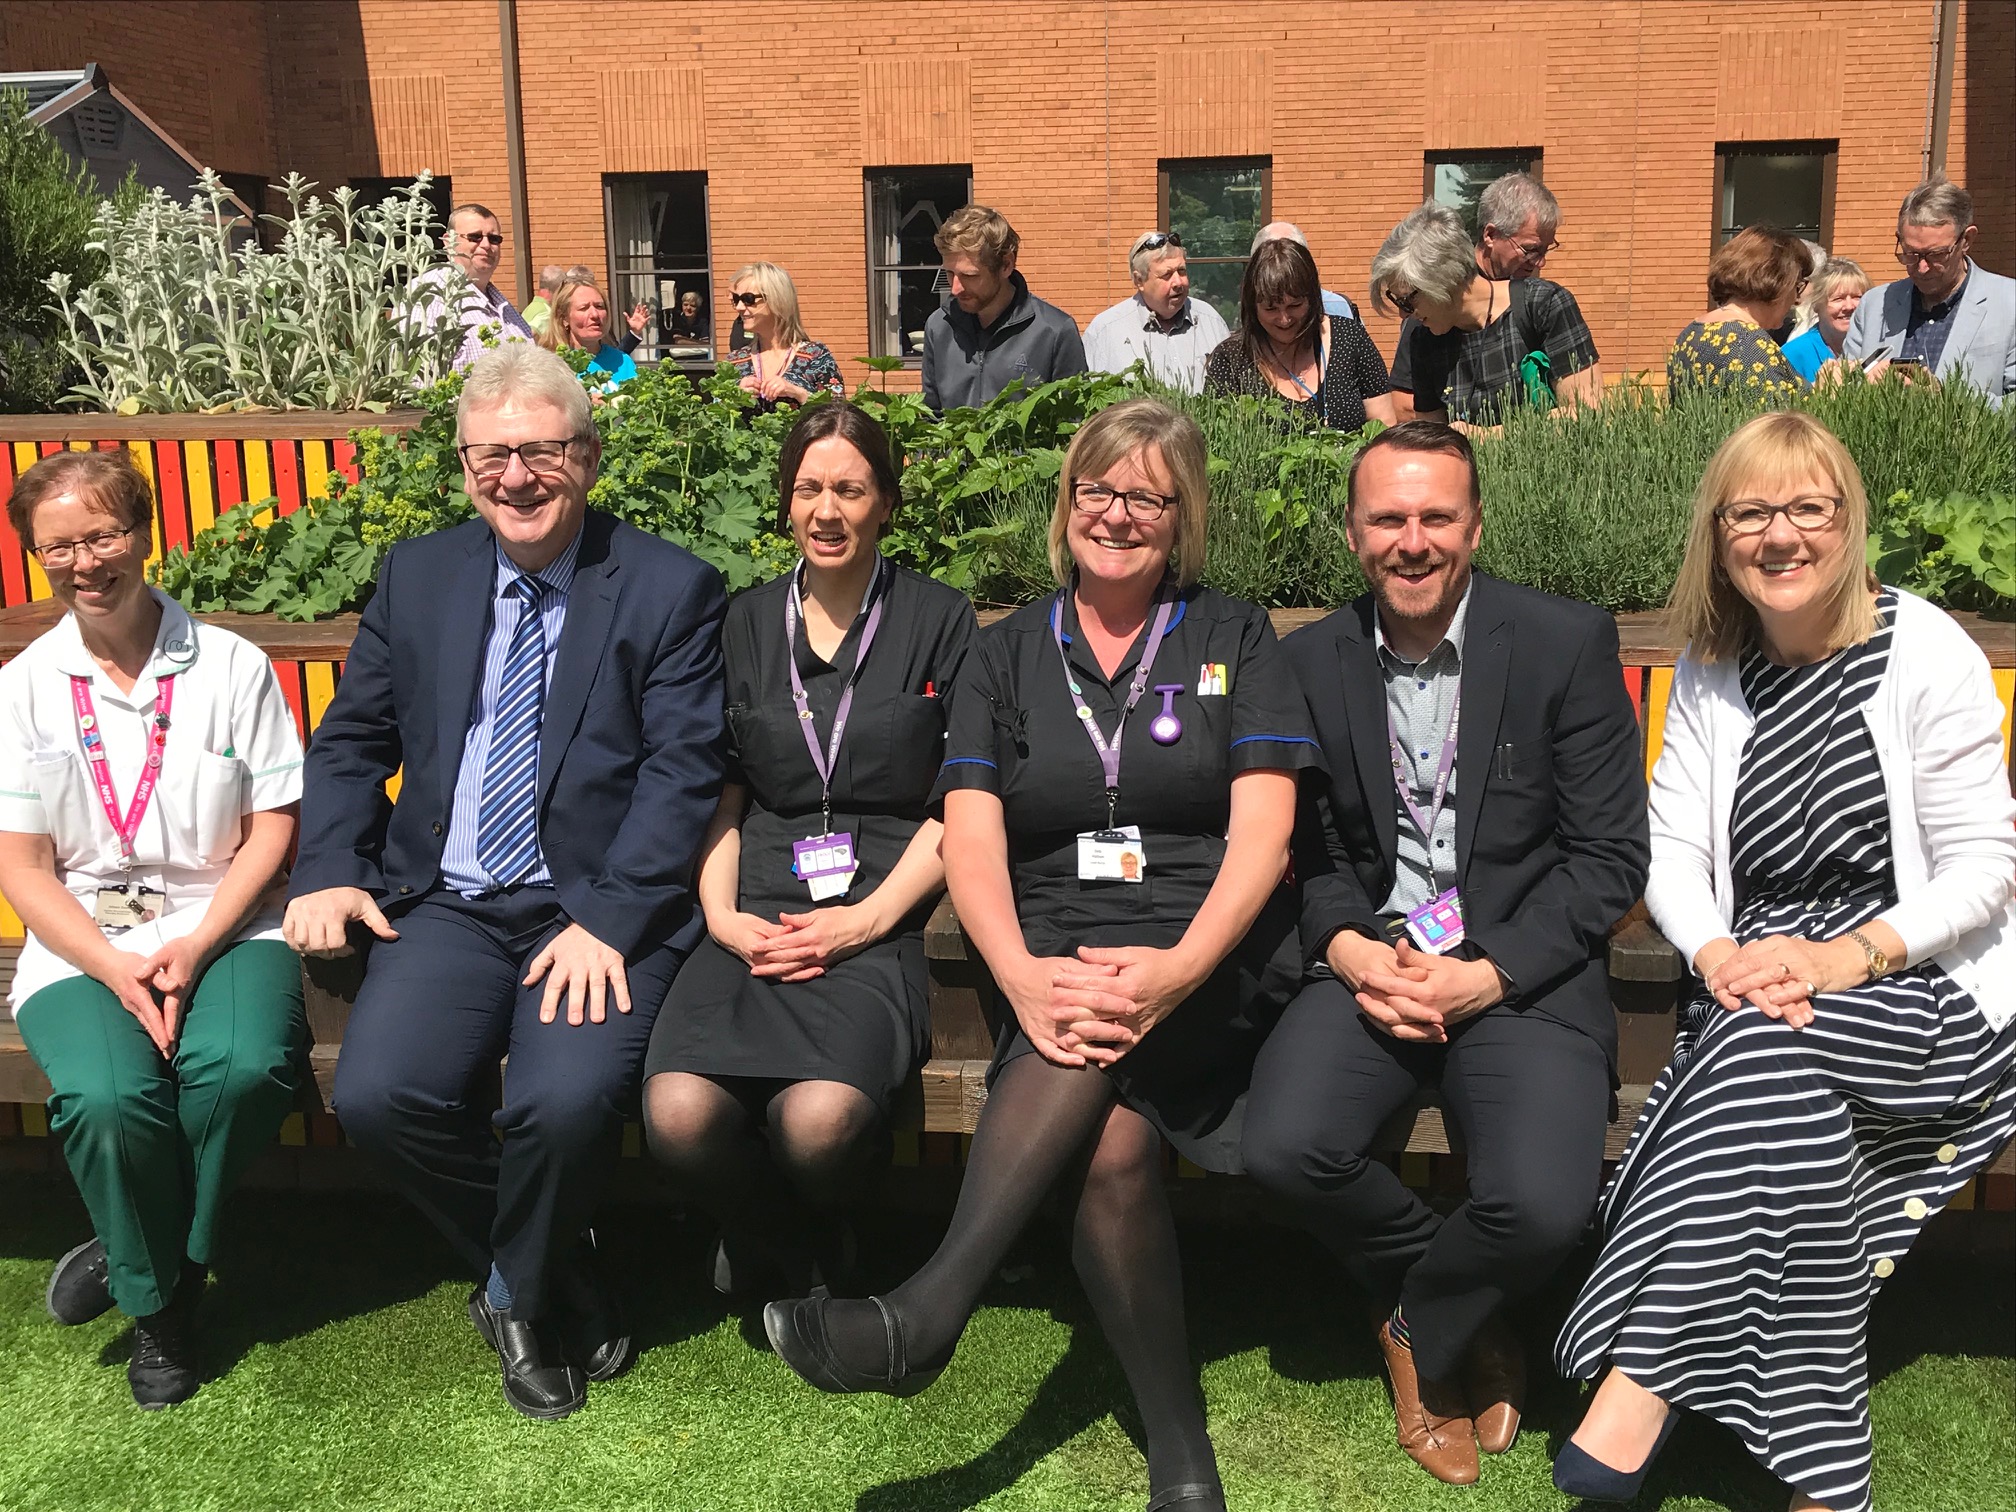 Staff enjoying the sunshine at the opening of the garden